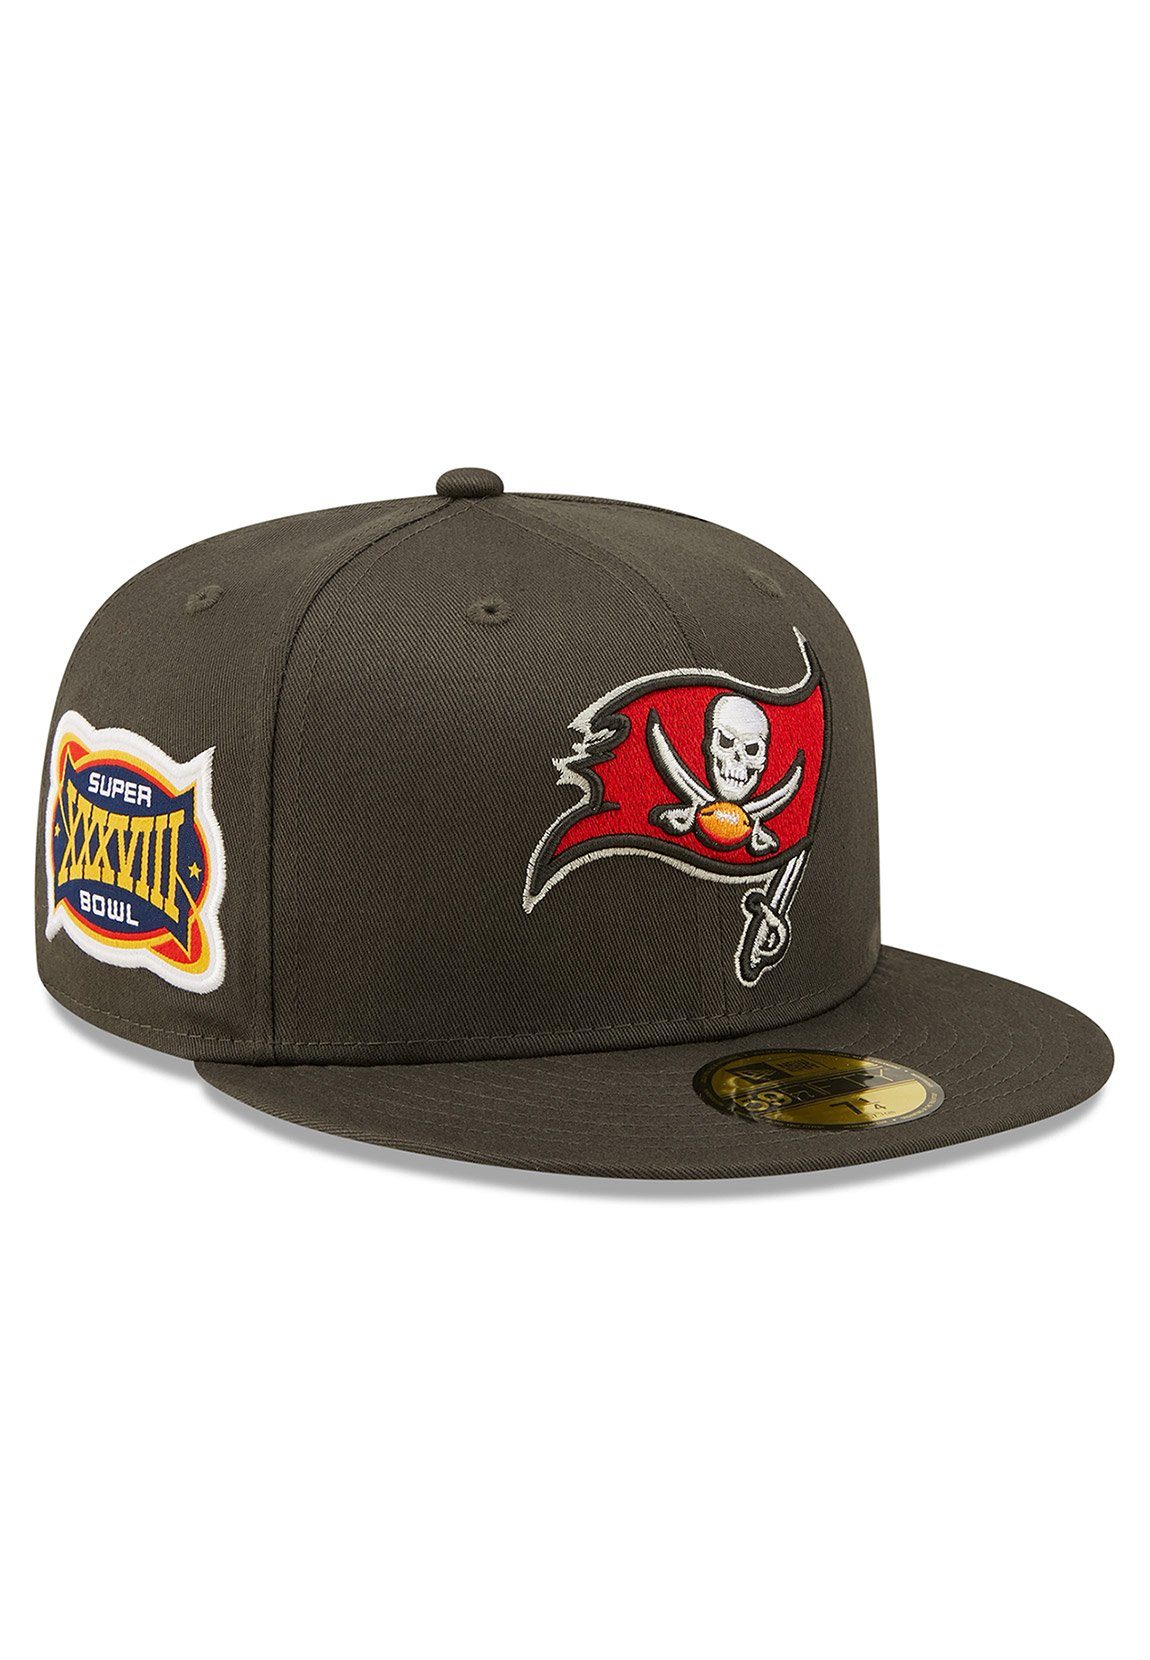 New Era Fitted Cap BAY Grau Side BUCCANEERS Patch 59Fifty Charcoal New TAMPA